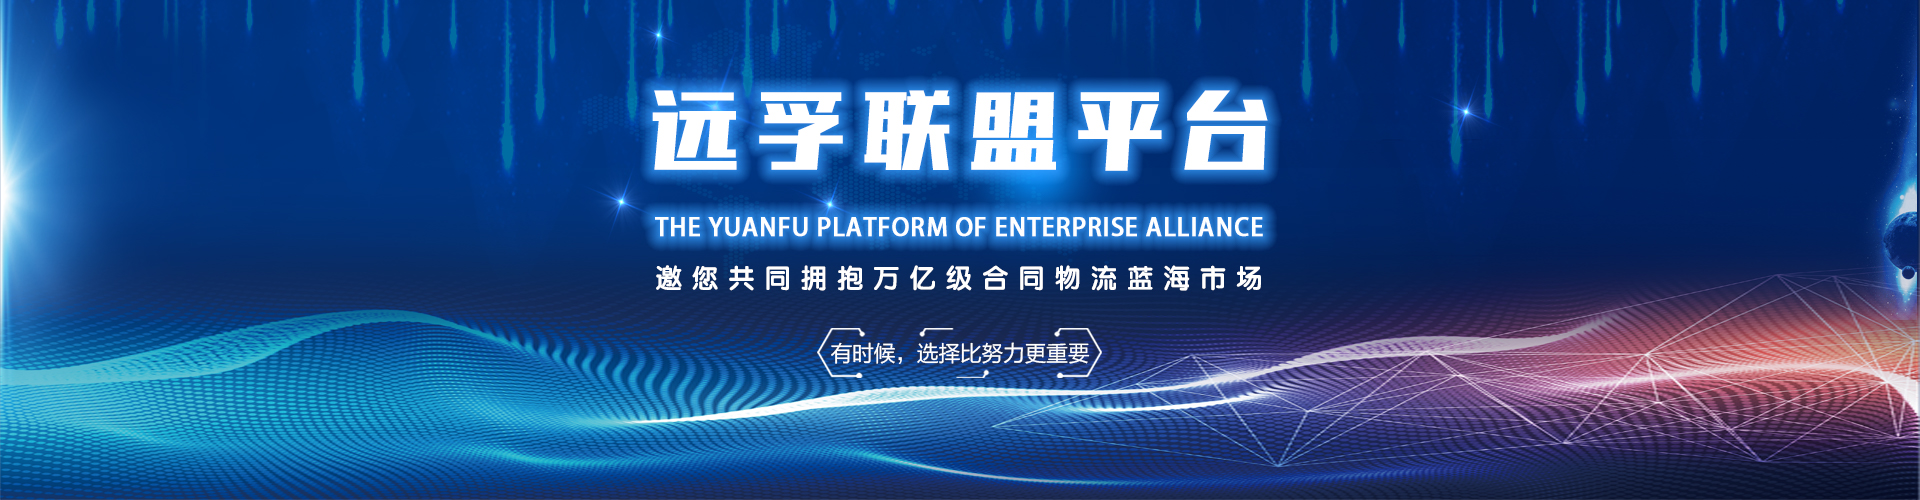 General Chemical Industry Case_Yuanfu Logistics Group Co.,Ltd.—Serving our customer to focus on core business,win-win on the supply chain【official website】